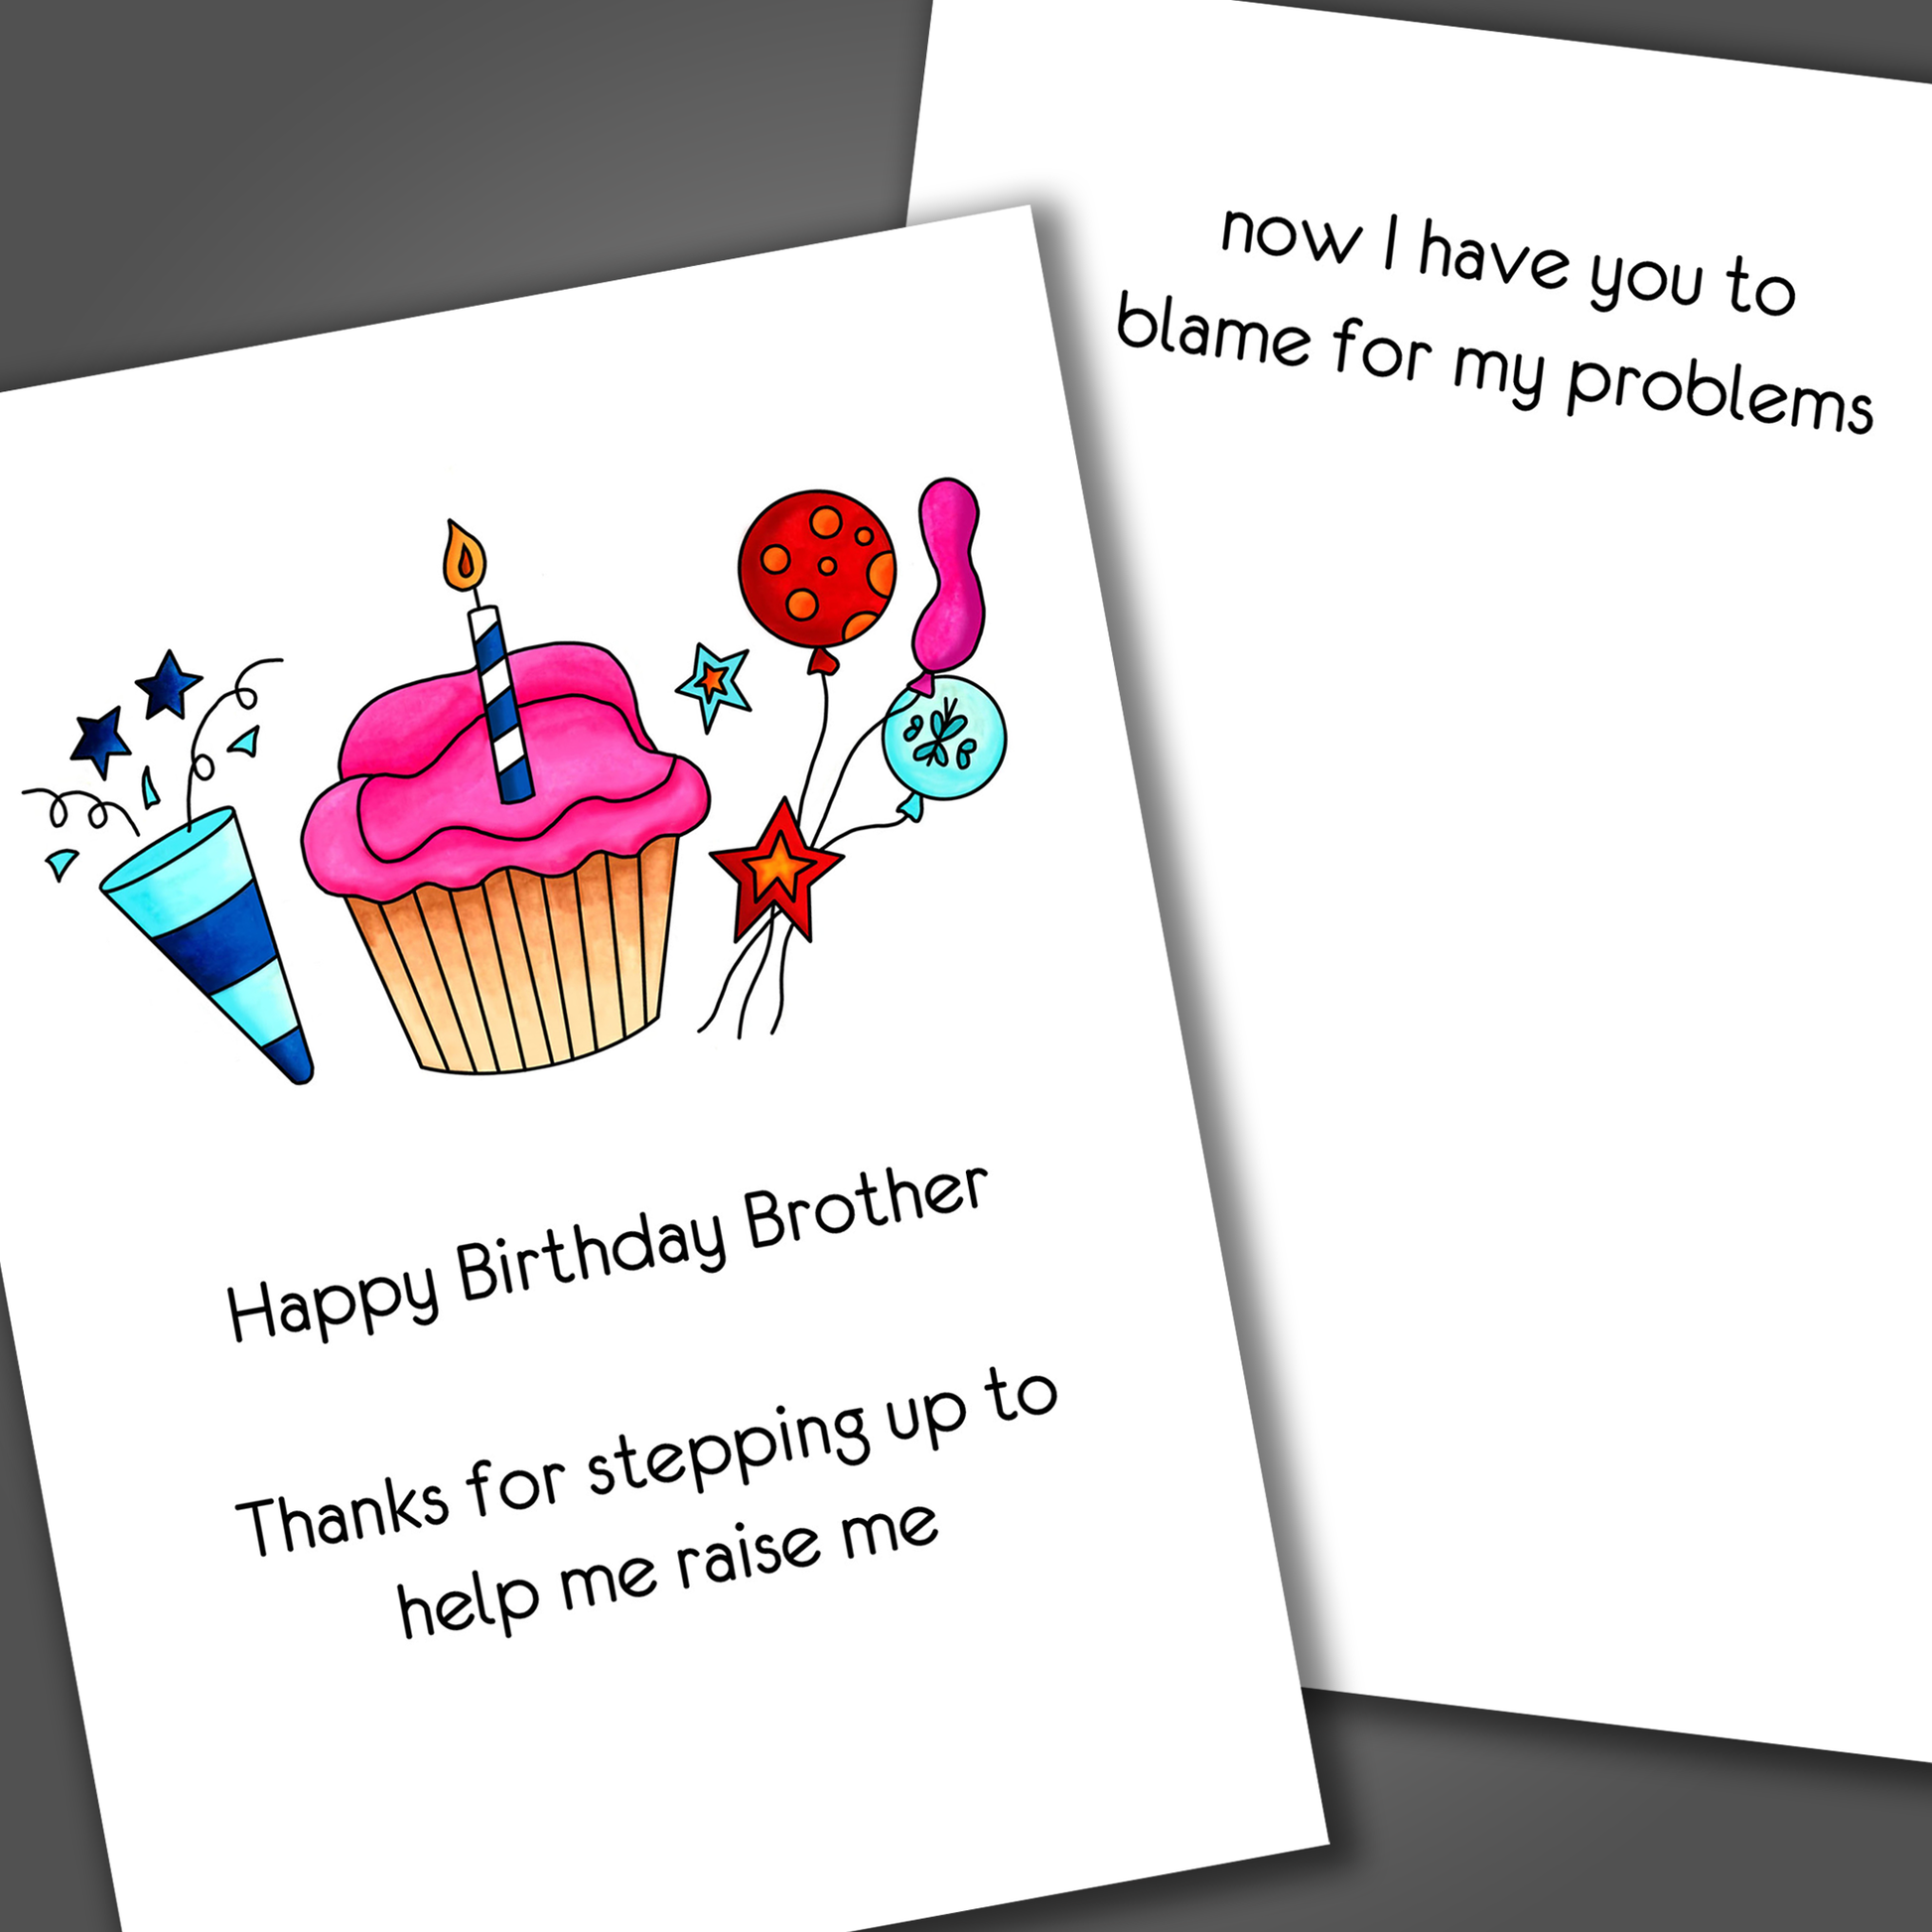 Funny happy birthday card for a brother with a pink cupcake and balloons drawn on the front. Inside of the card is a funny joke that blames the brother of all the sibling's problems.